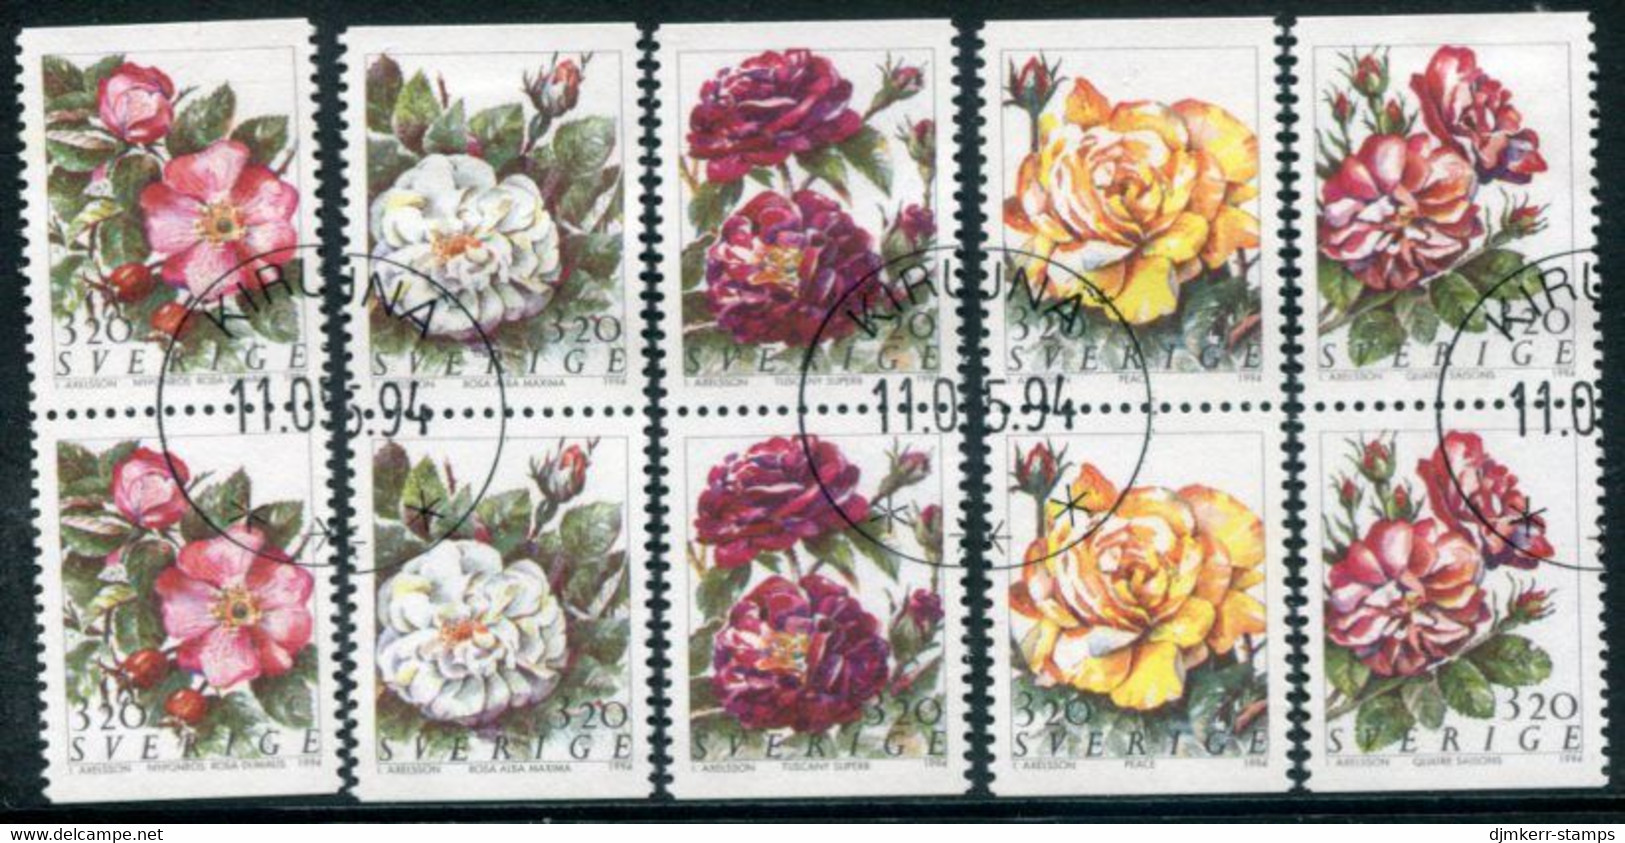 SWEDEN 1994 Roses Used.   Michel 1823-27 - Used Stamps